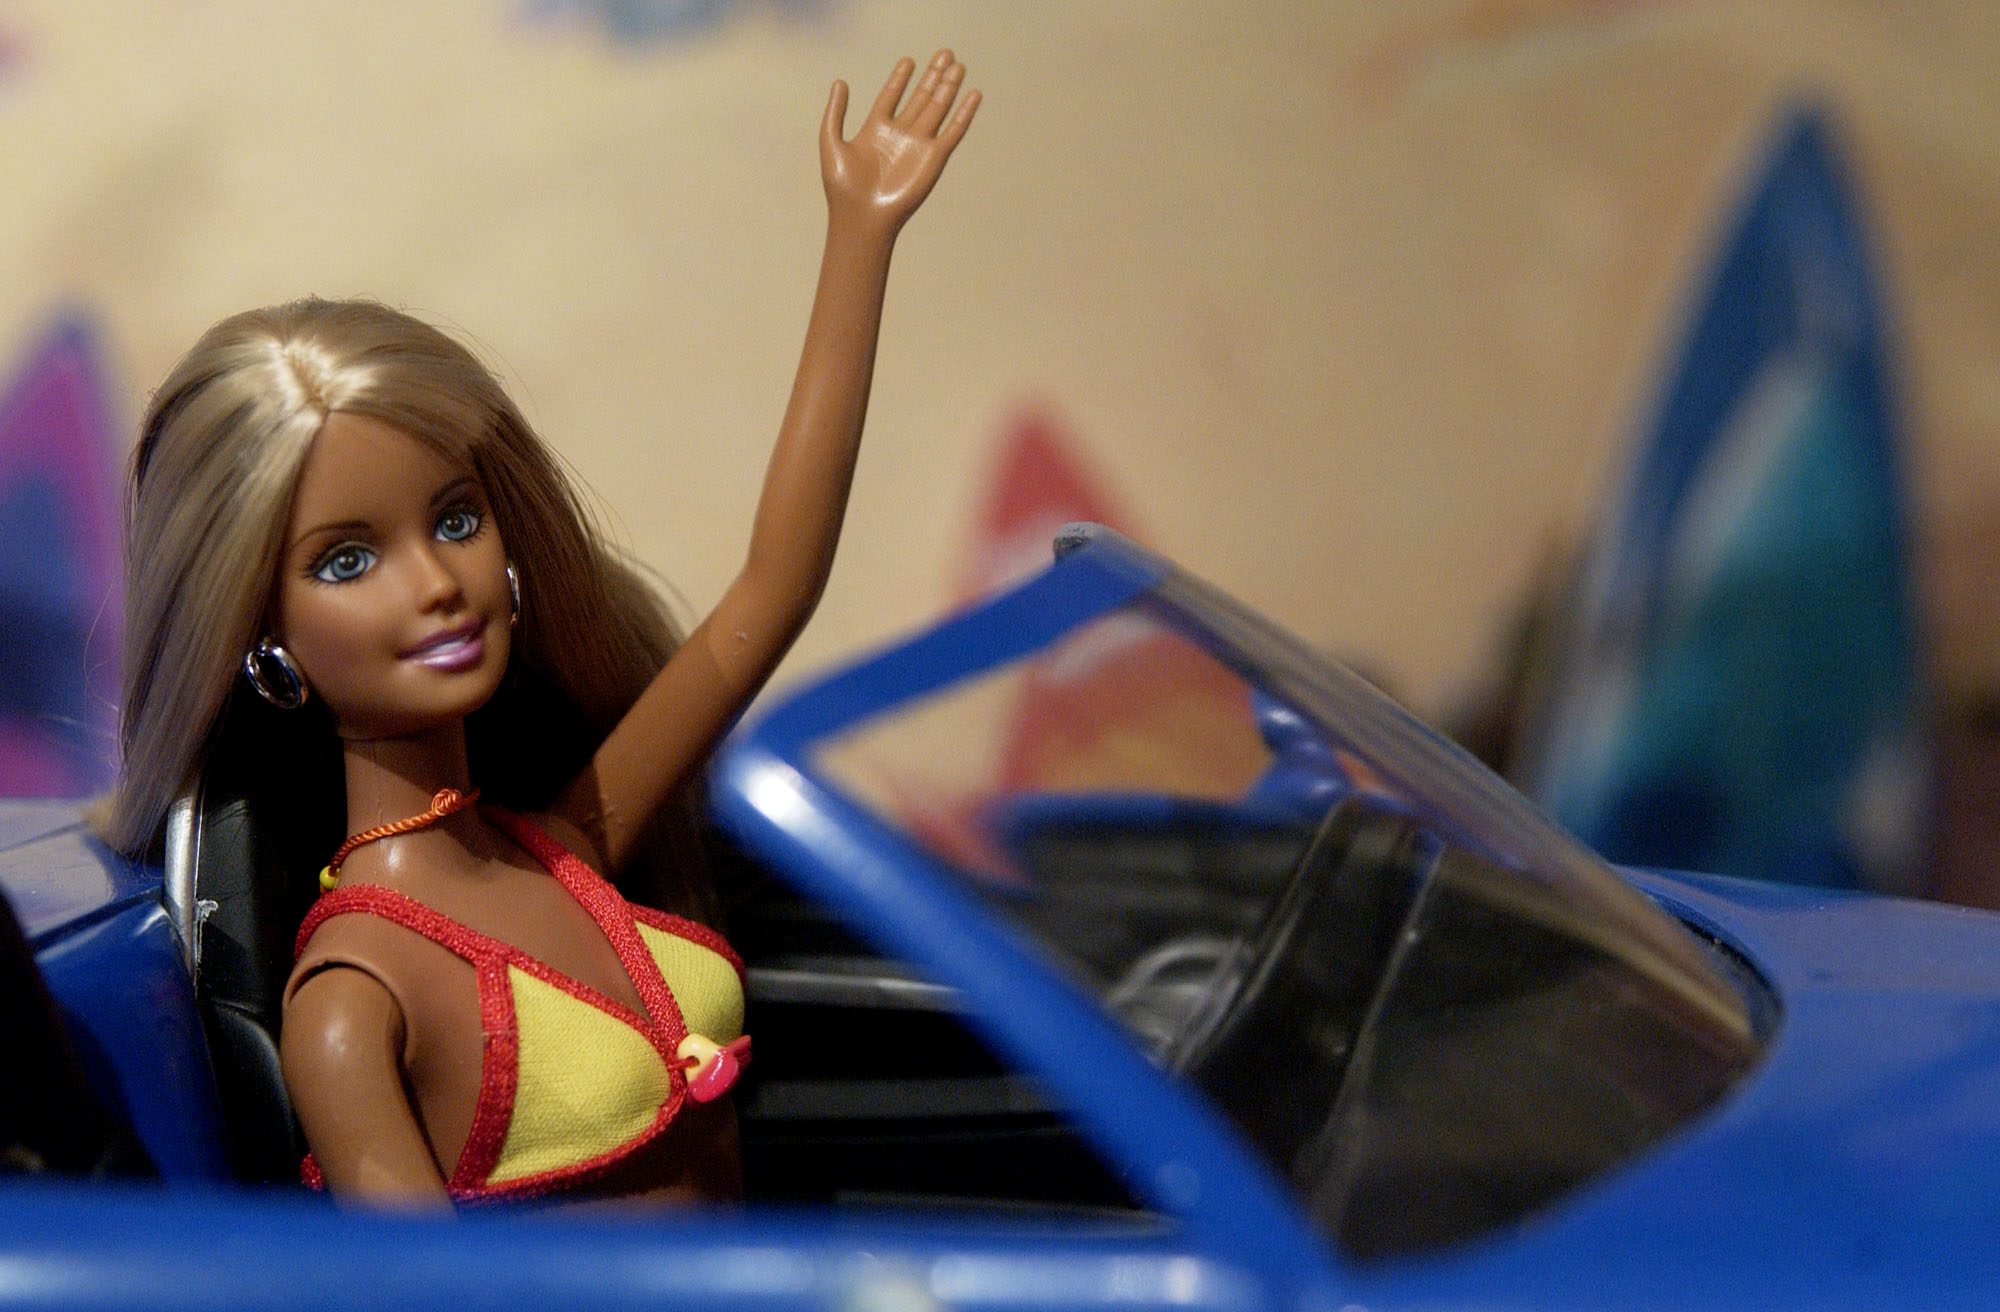 Cali Girl Barbie waves from the front seat of a Chevy (Bloomberg&mdash;Bloomberg via Getty Images)